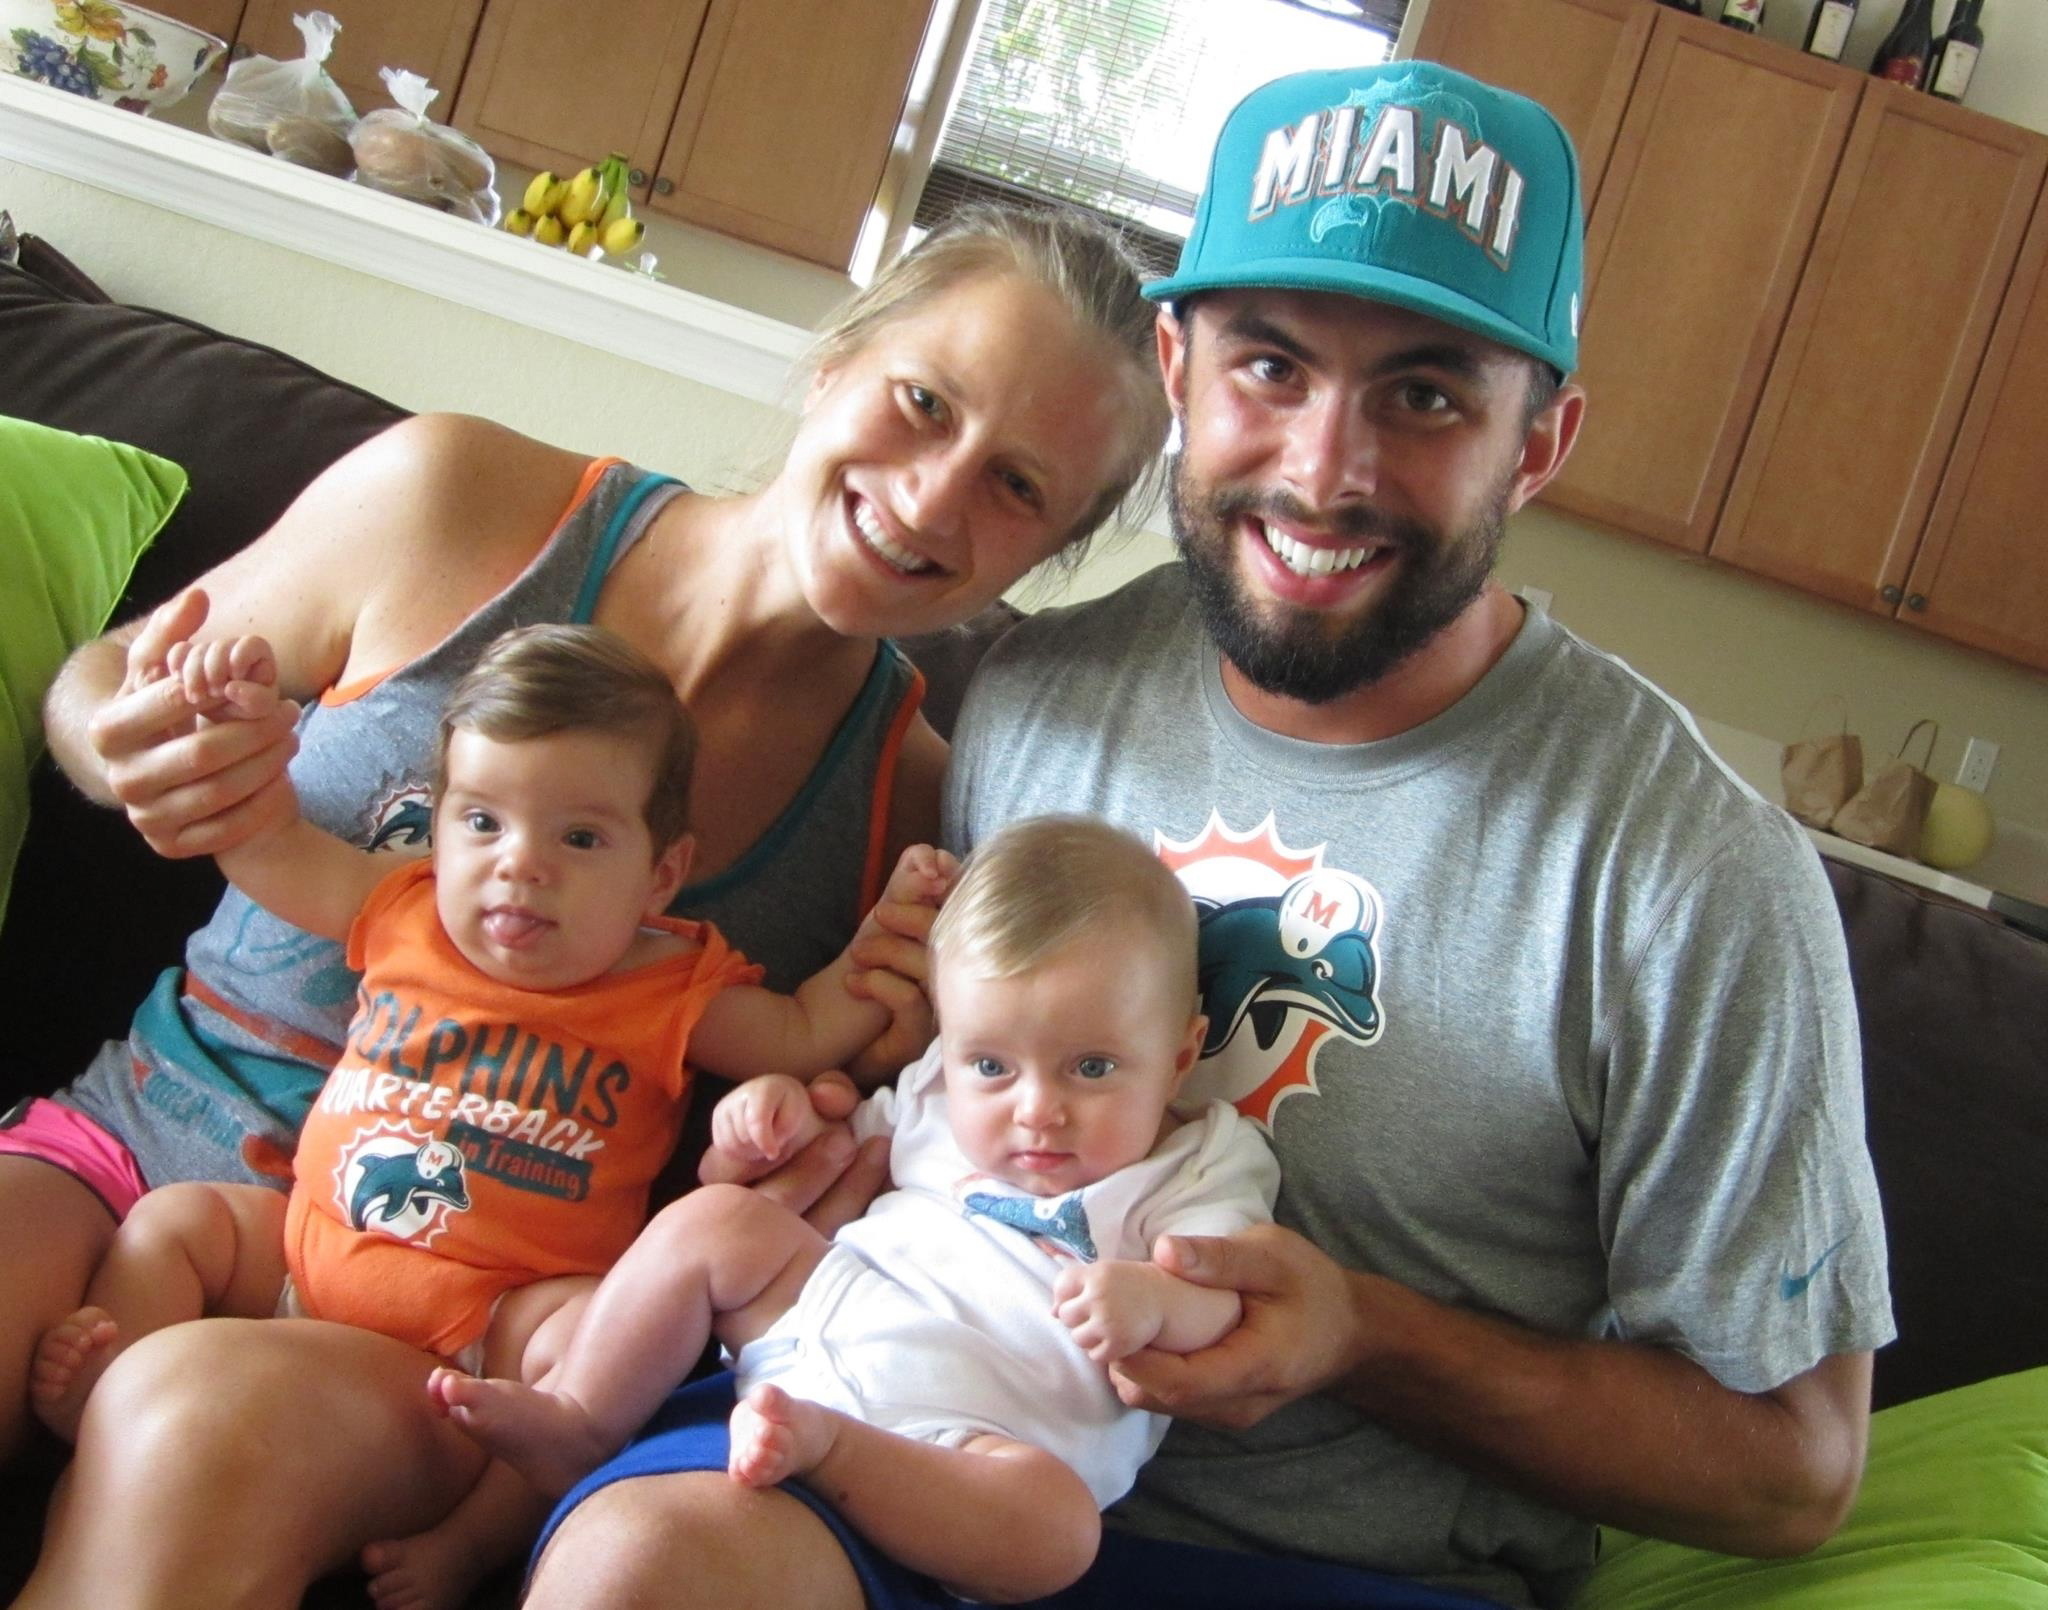 Laura Radocaj shares household and child-rearing duties with her husband, Marco They are holding their twins, Rudy, left, and Ryan in Vero Beach, Fla.